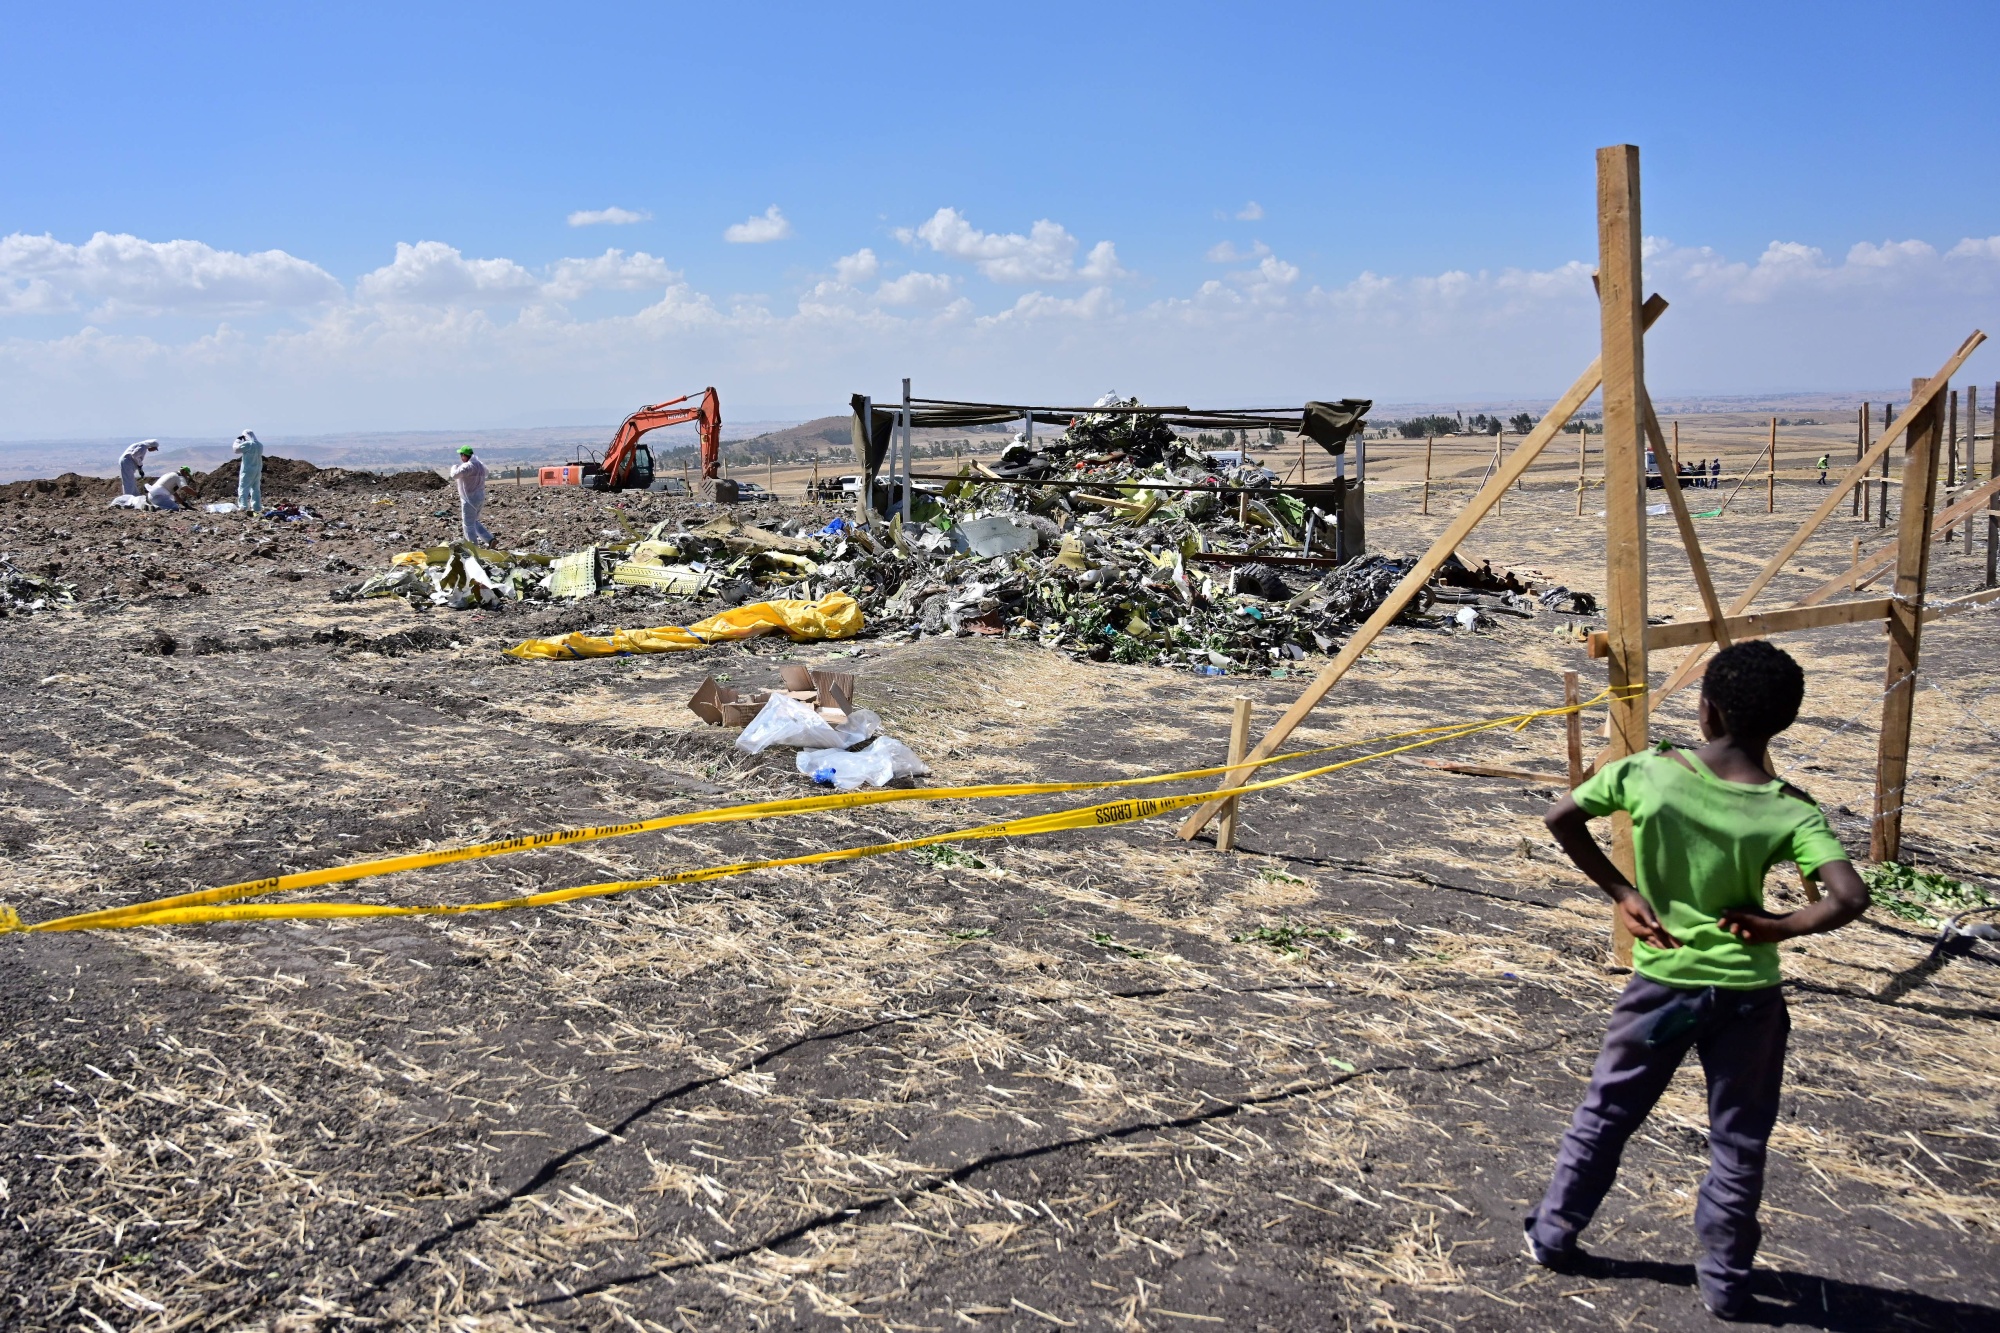 A boys look as forensic investigators comb the ground for DNA evidence near a pile of airplane debris at the crash site of an Ethiopian airways operated Boeing 737 MAX aircraft on March 16, 2019.